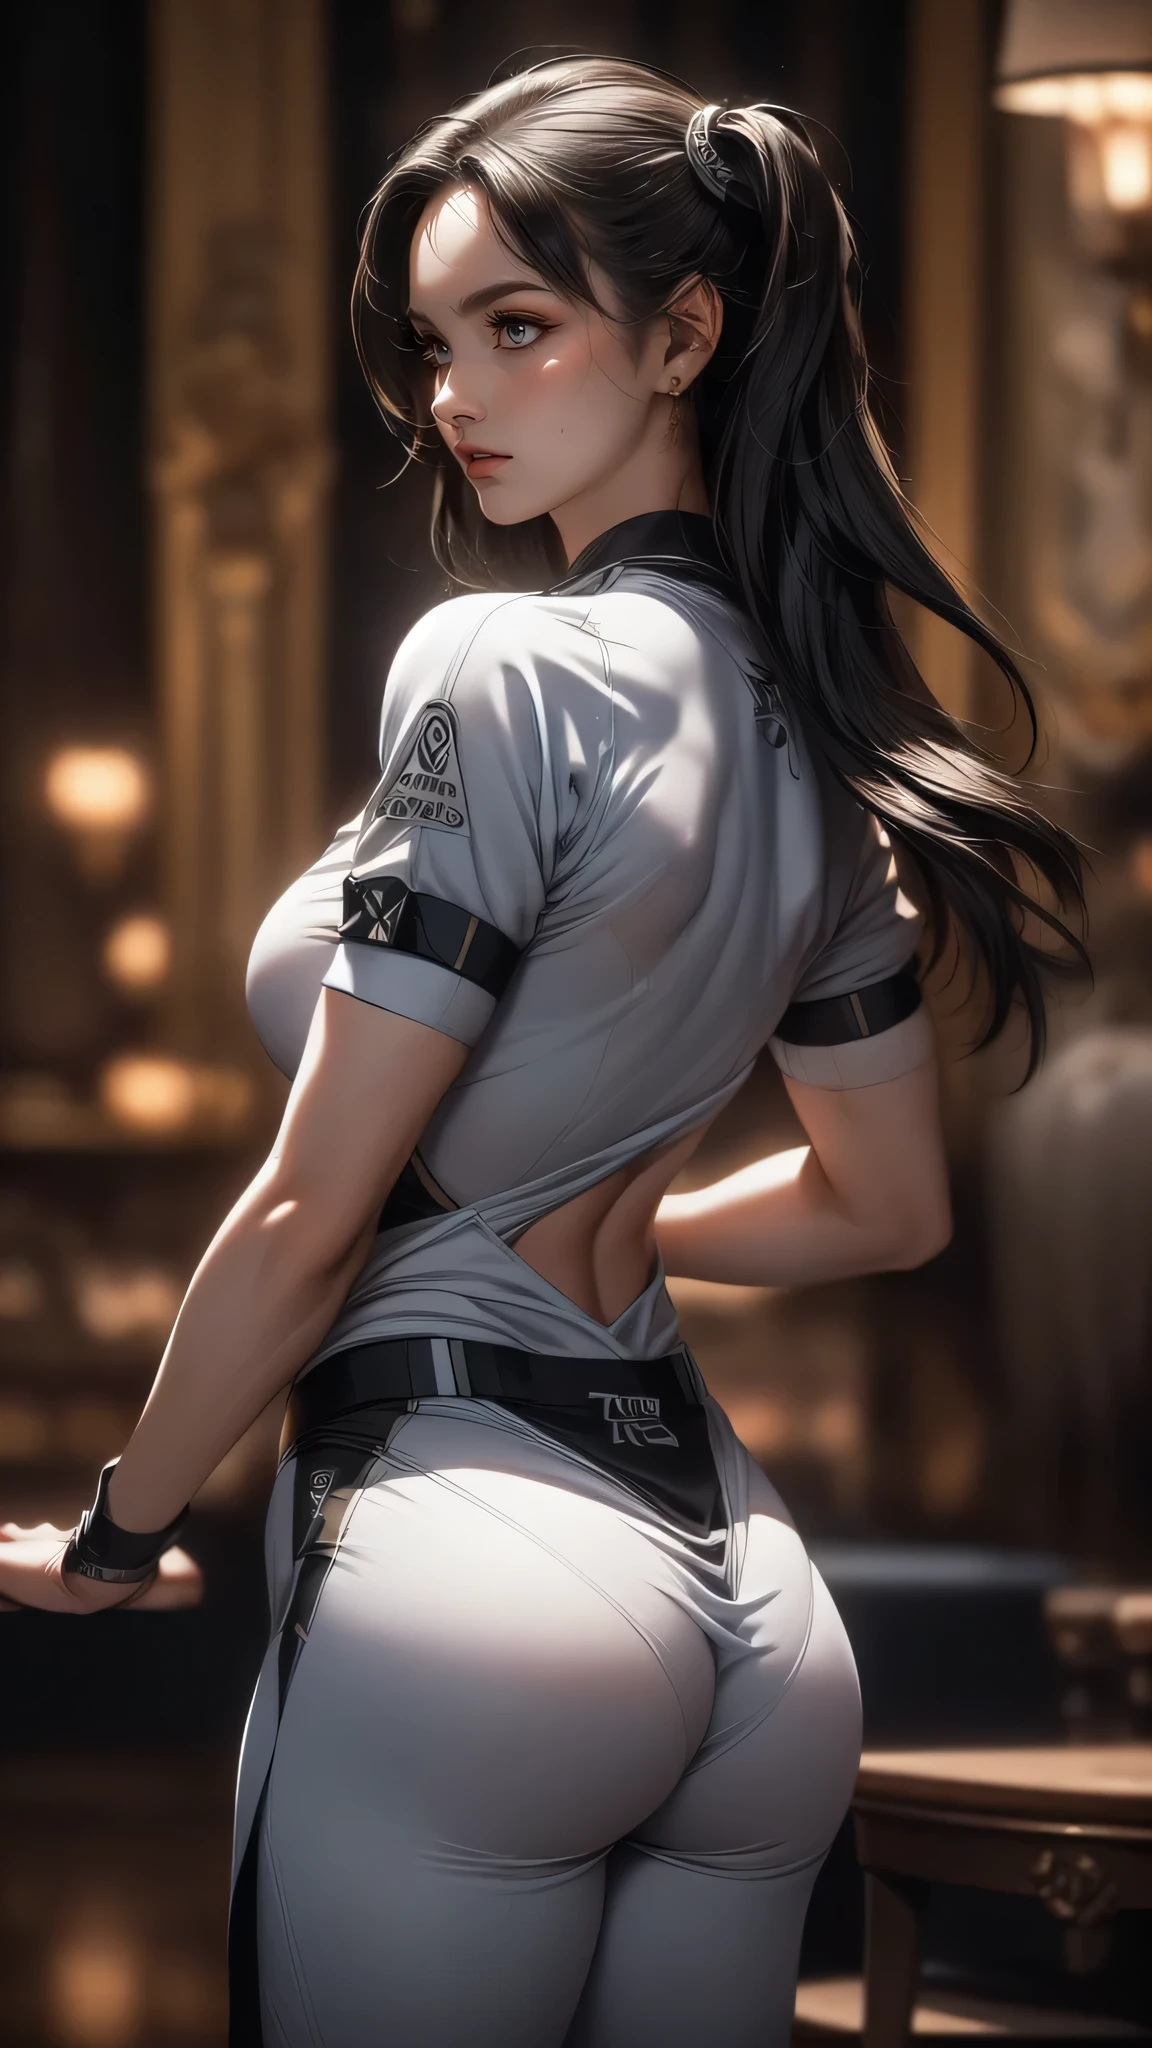 from behind,backwards,stretch,Gym suit,(fantasy art,best image quality,(8k),Super realistic,最high quality, high quality, High resolution, high quality texture,high detail,beautiful,Detailed,Very detailed CG,detailed texture,realistic expression of face,masterpiece,sense of presence,dynamic,bold)